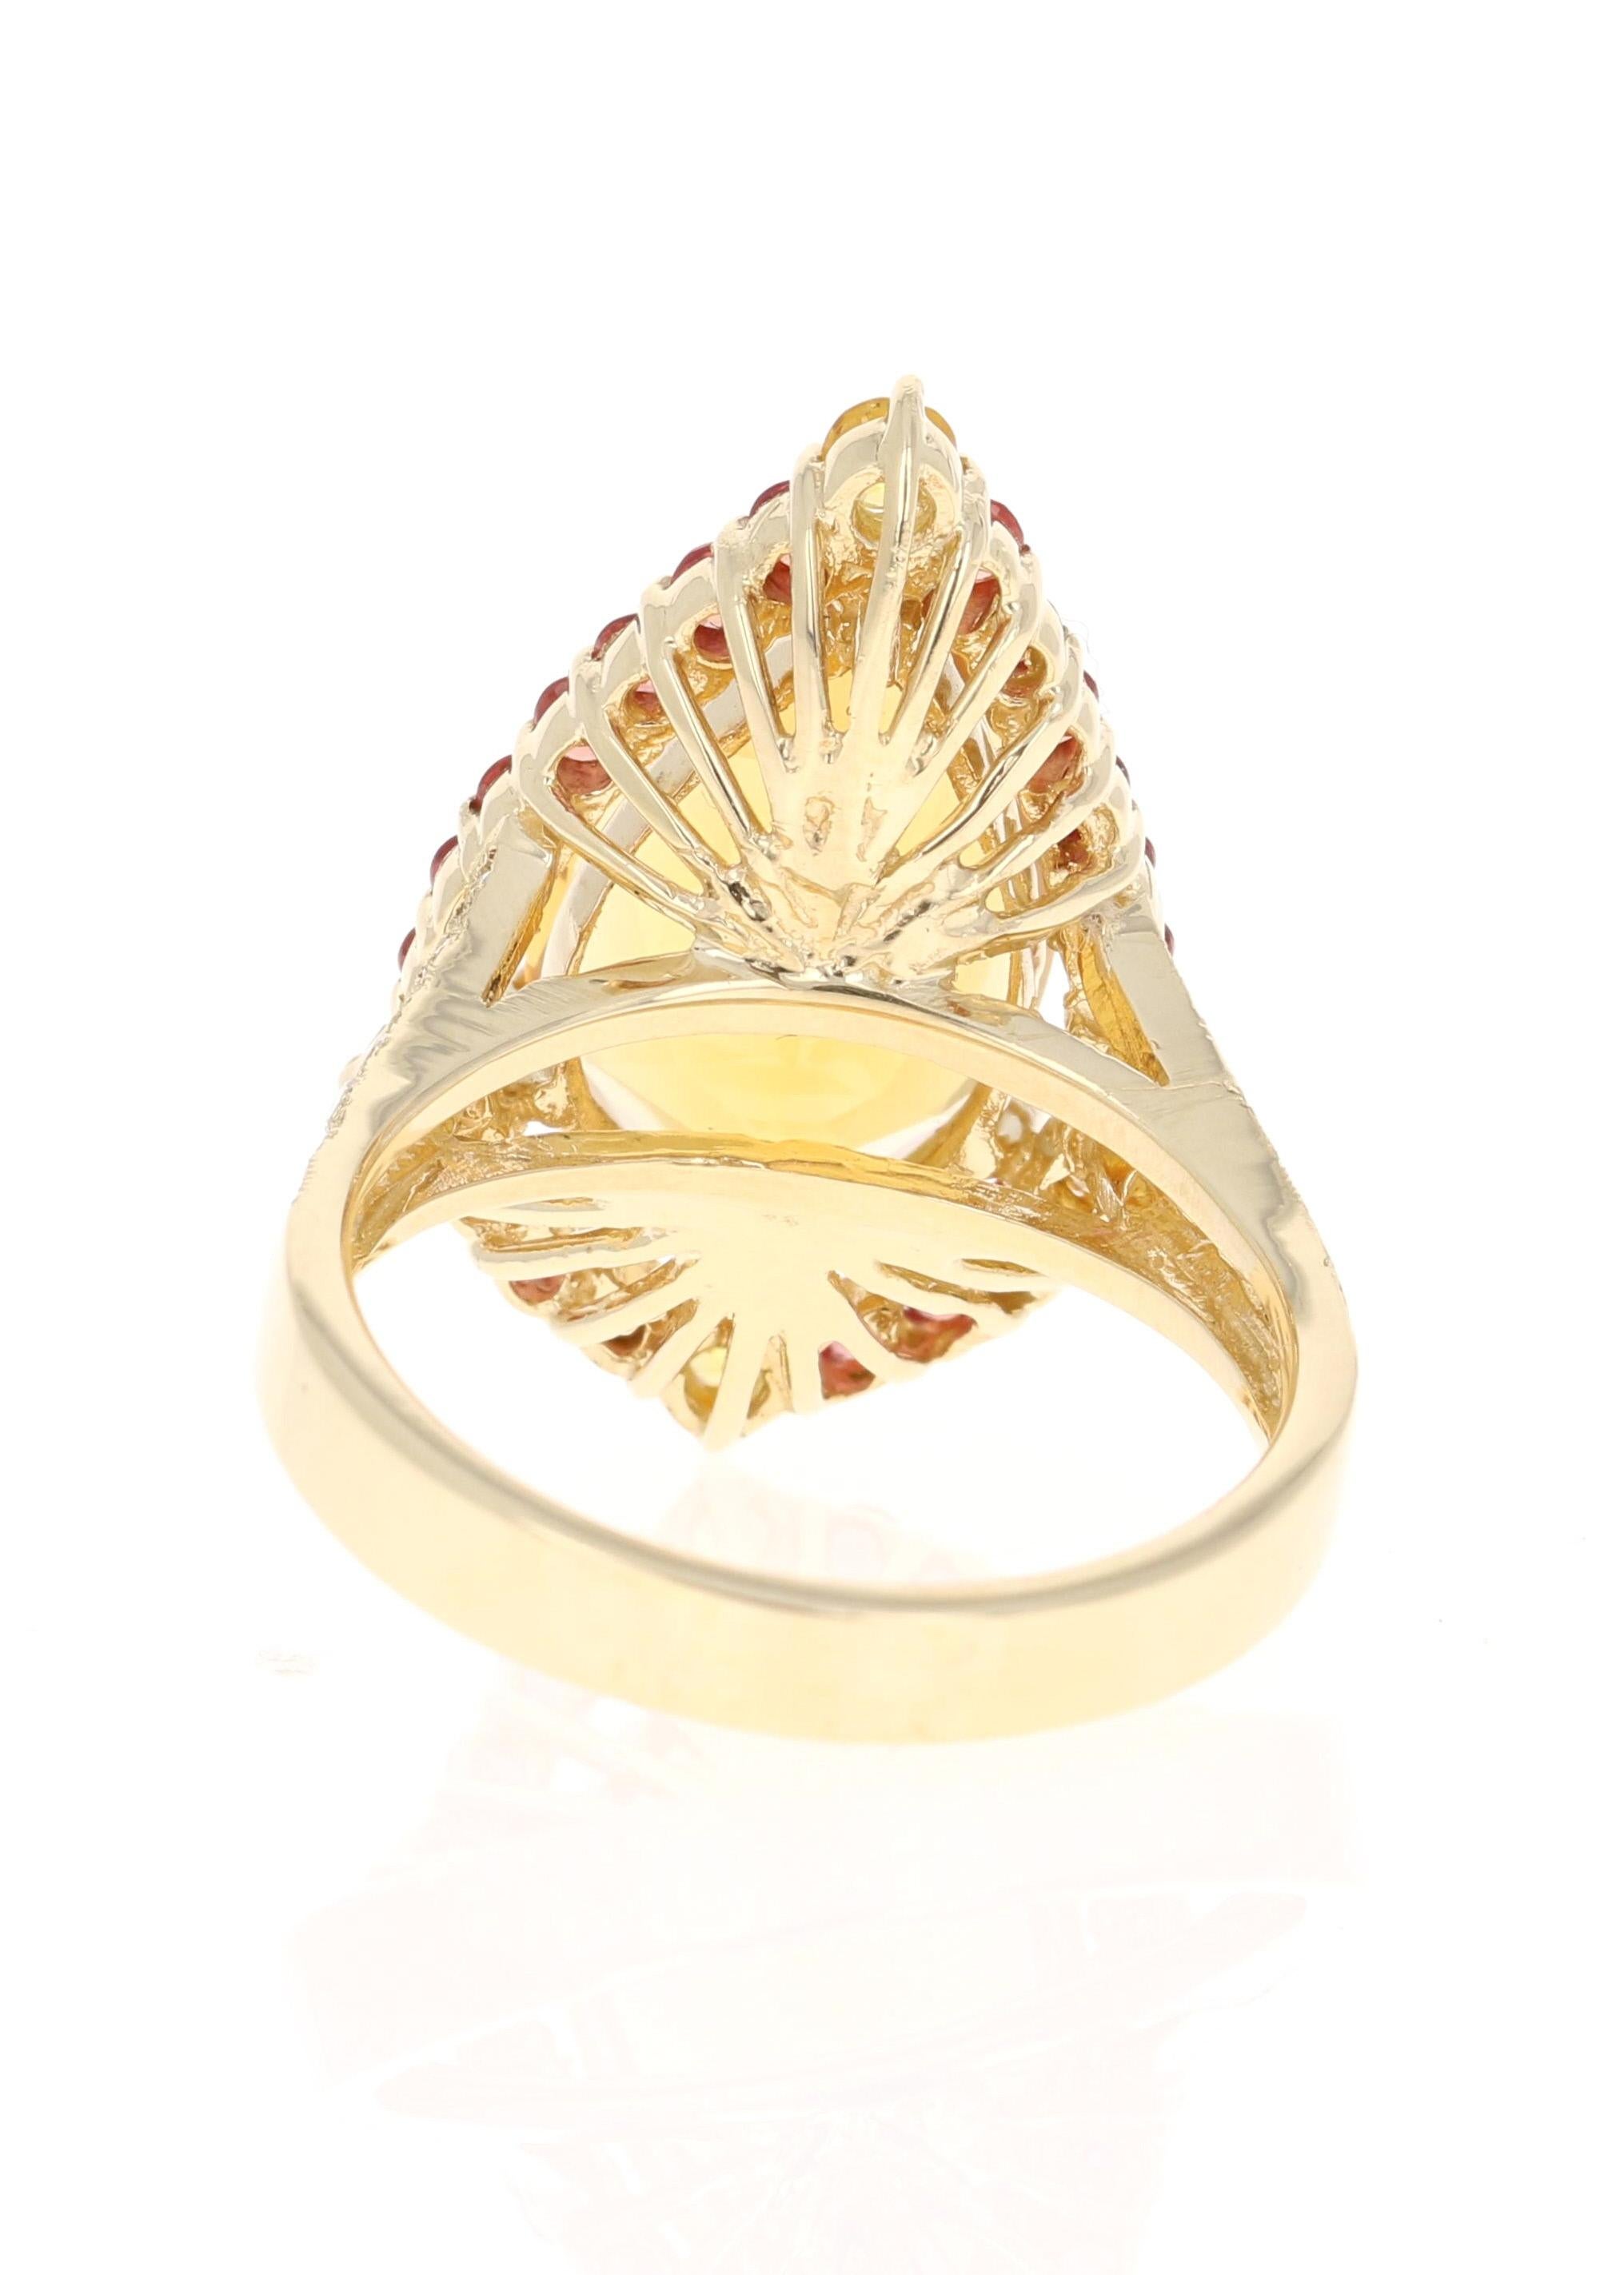 Contemporary 6.52 Carat Pear Cut Citrine Sapphire Diamond Yellow Gold Engagement Ring For Sale